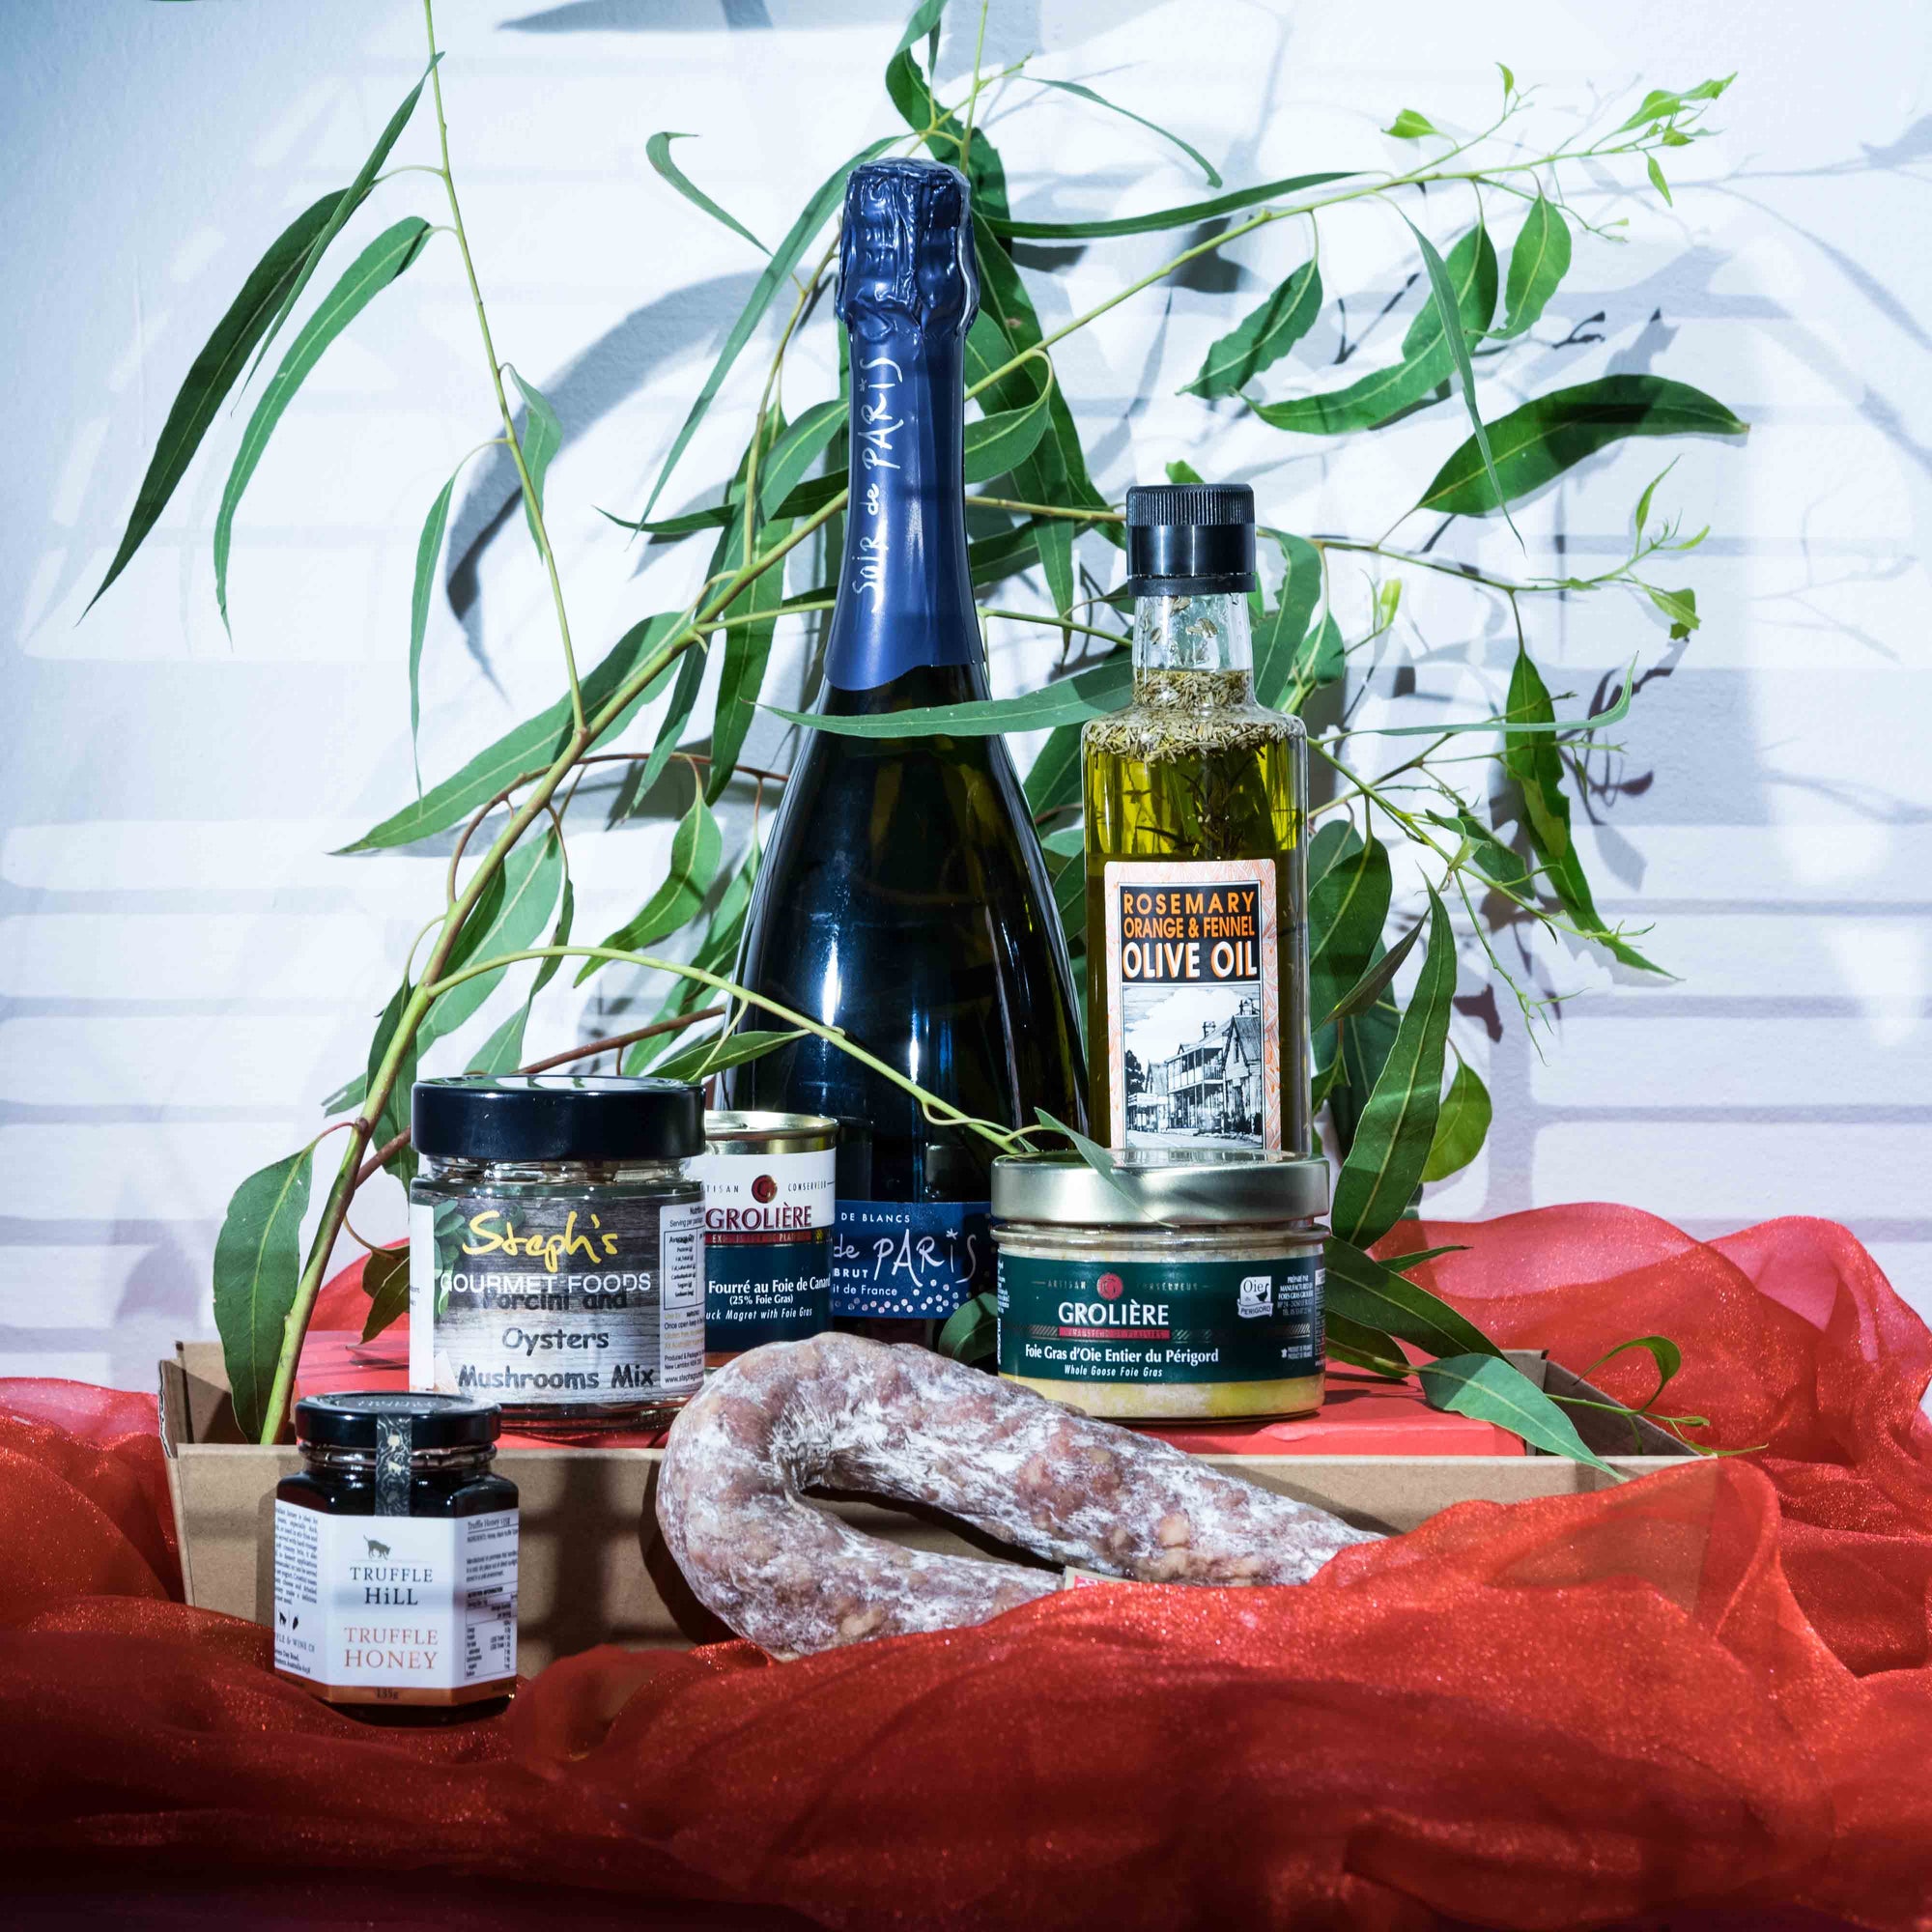 1X Stuffed Duck Breast with Foie Gras  190g  1X Goose Foie Gras  180g  1X Porcini Oysters Mushrooms  ( Approx 15g )  1X Saucisson Sec  ( Approx 500g )  1X Extra Bottle of Olive Oil Wollombi  500ml  1X Bottle of Sparkling   750ml  1xTruffle Honey    135g     